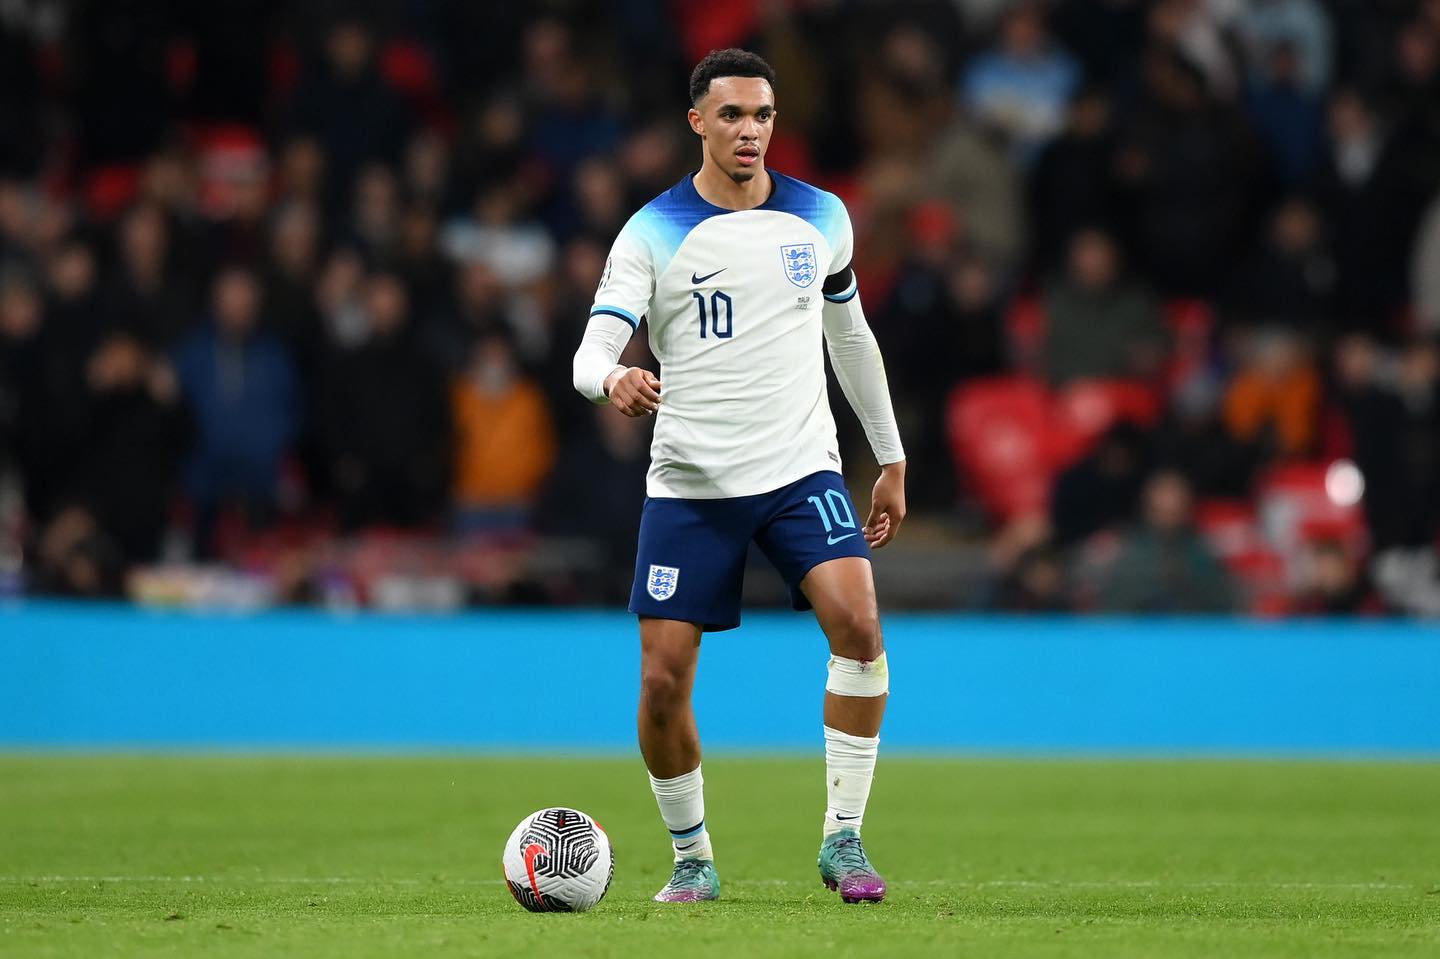 Trent Alexander-Arnold Biography: Age, Net Worth, Spouse, Height, Parents, Instagram, Siblings, Team, Awards, Wiki